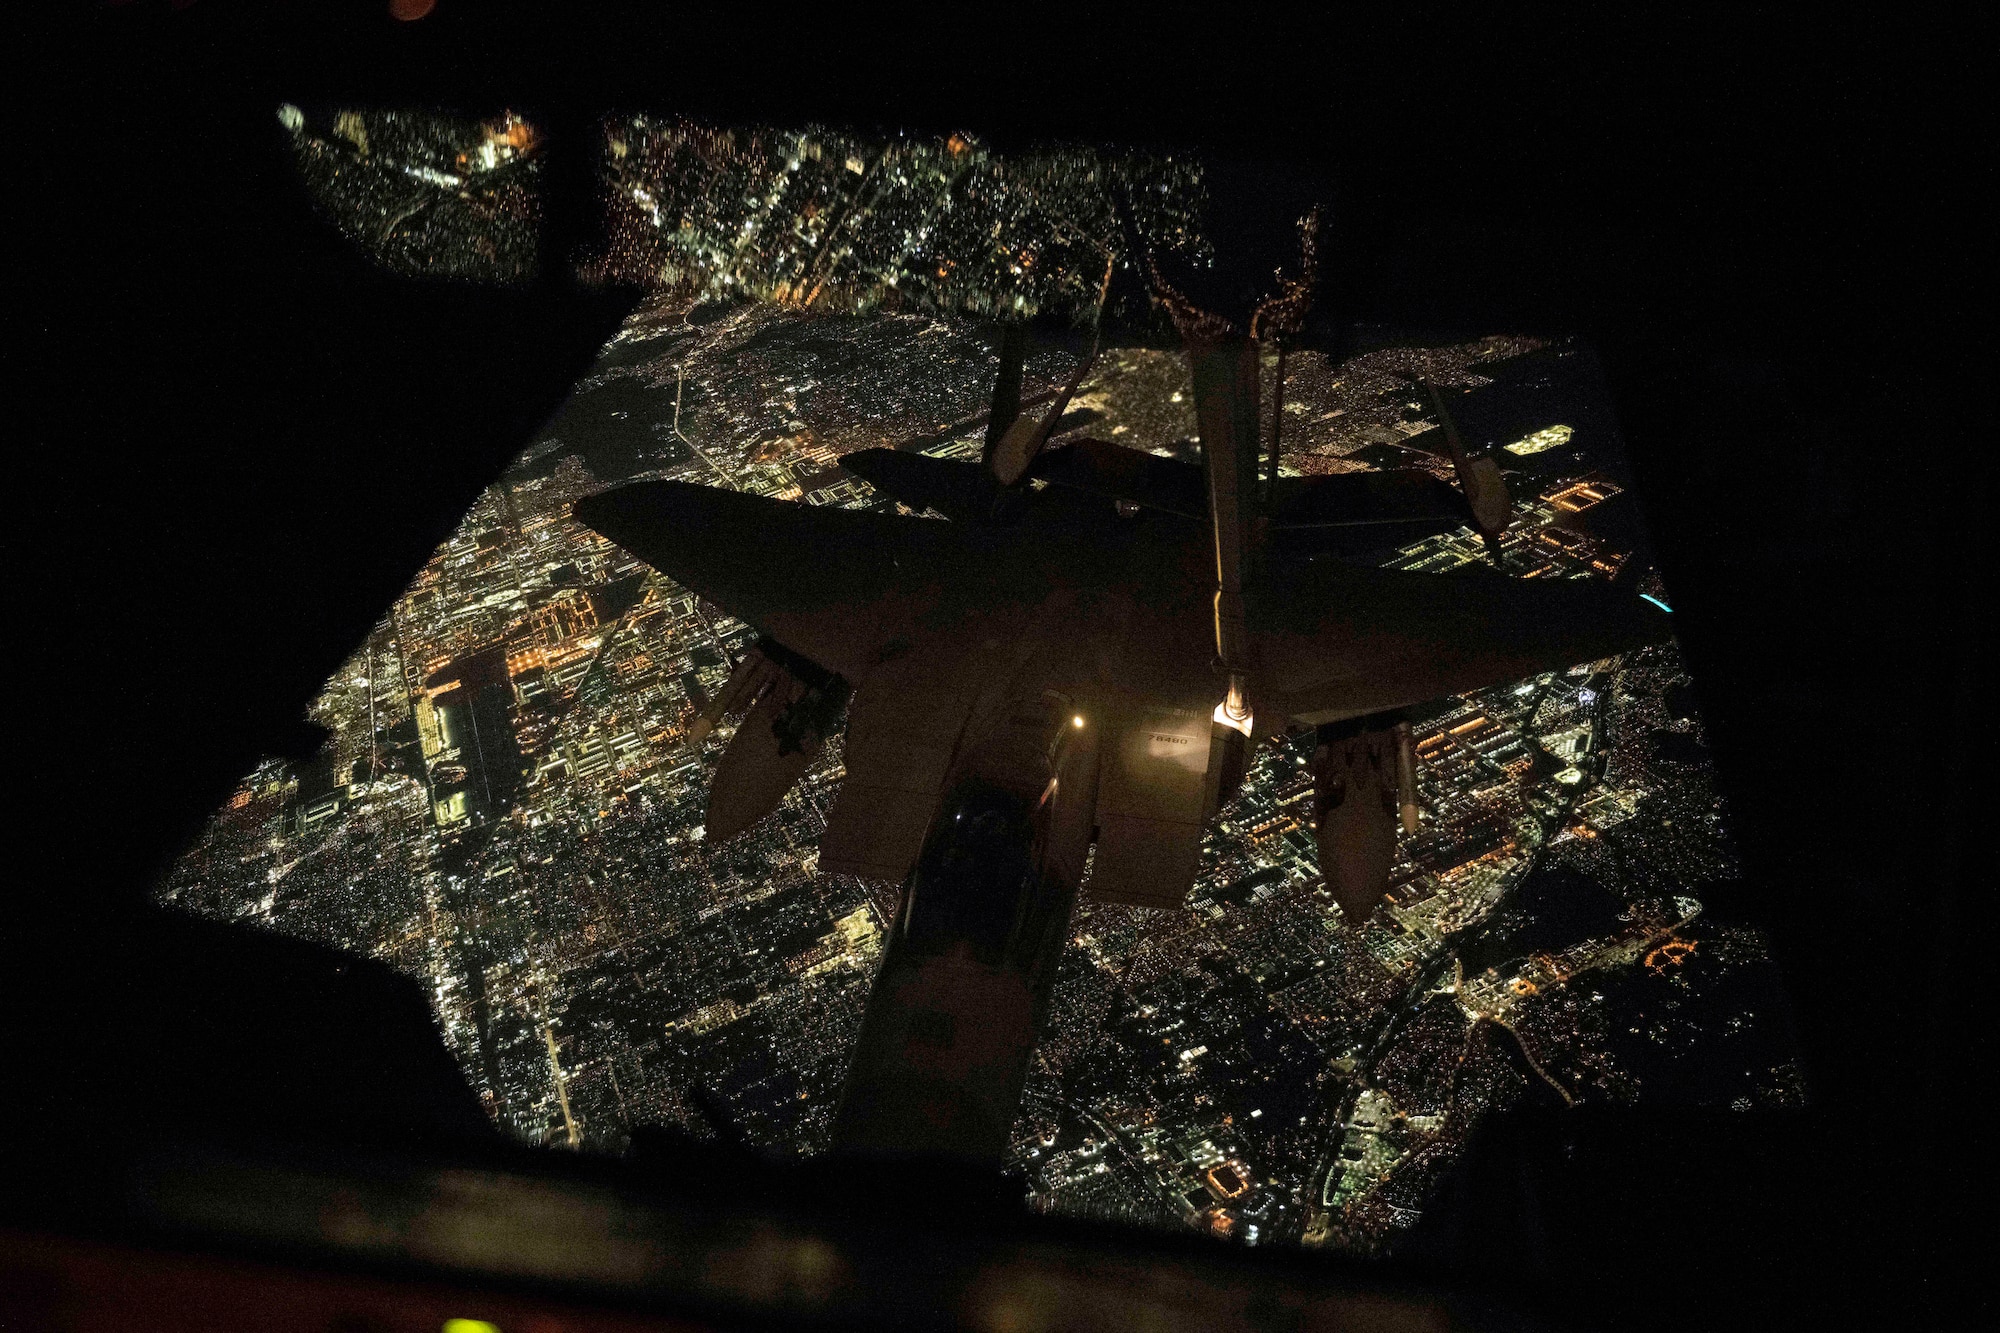 An F-15E Strike Eagle refuels over Los Angeles at night